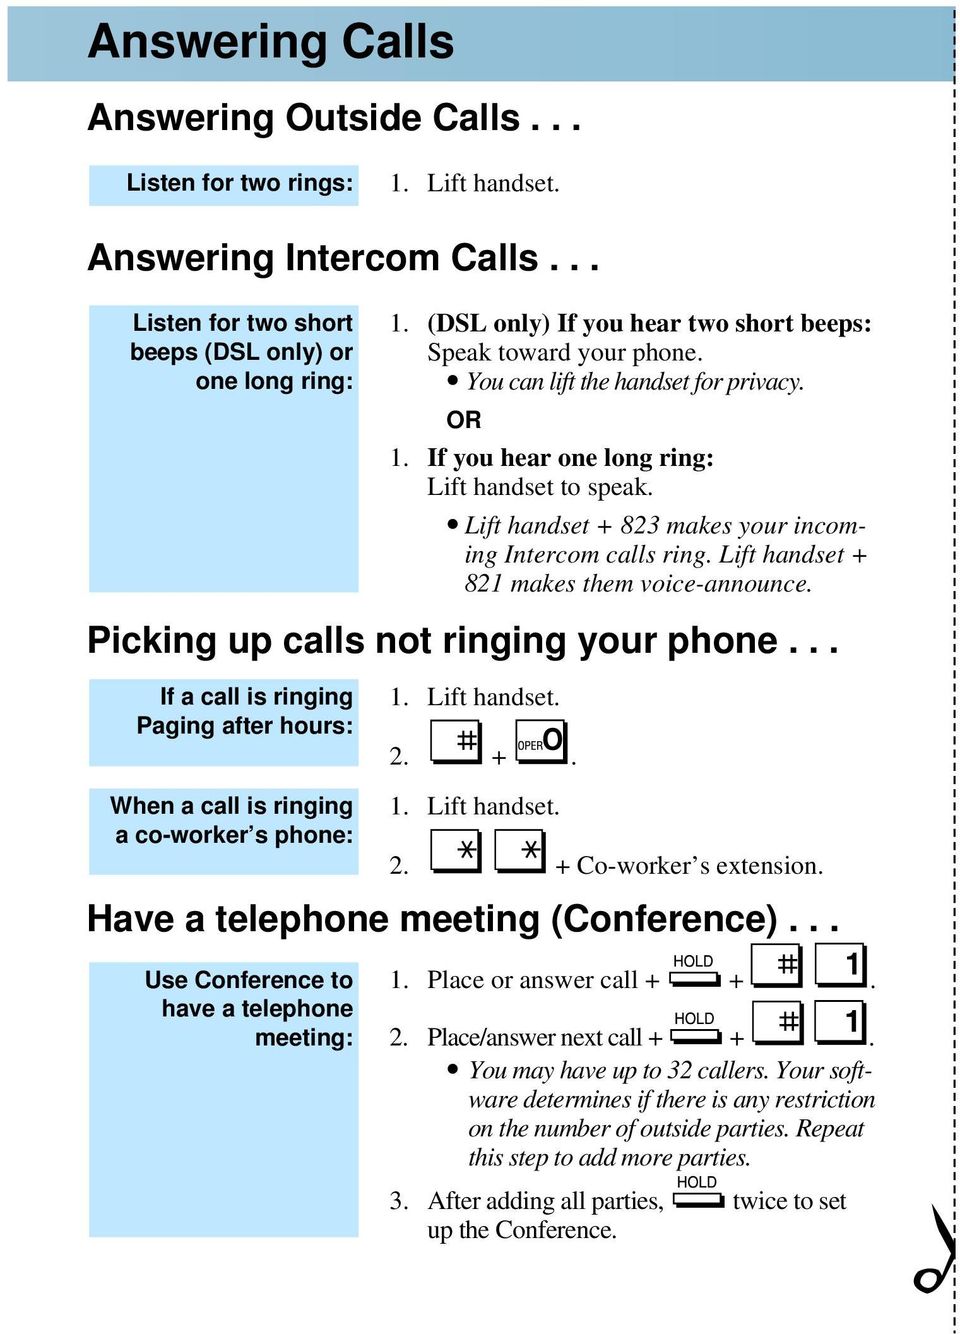 Lift handset + 823 makes your incoming Intercom calls ring. Lift handset + 821 makes them voice-announce. Picking up calls not ringing your phone... If a call is ringing Paging after hours: 2. +. When a call is ringing a co-worker s phone: 2.